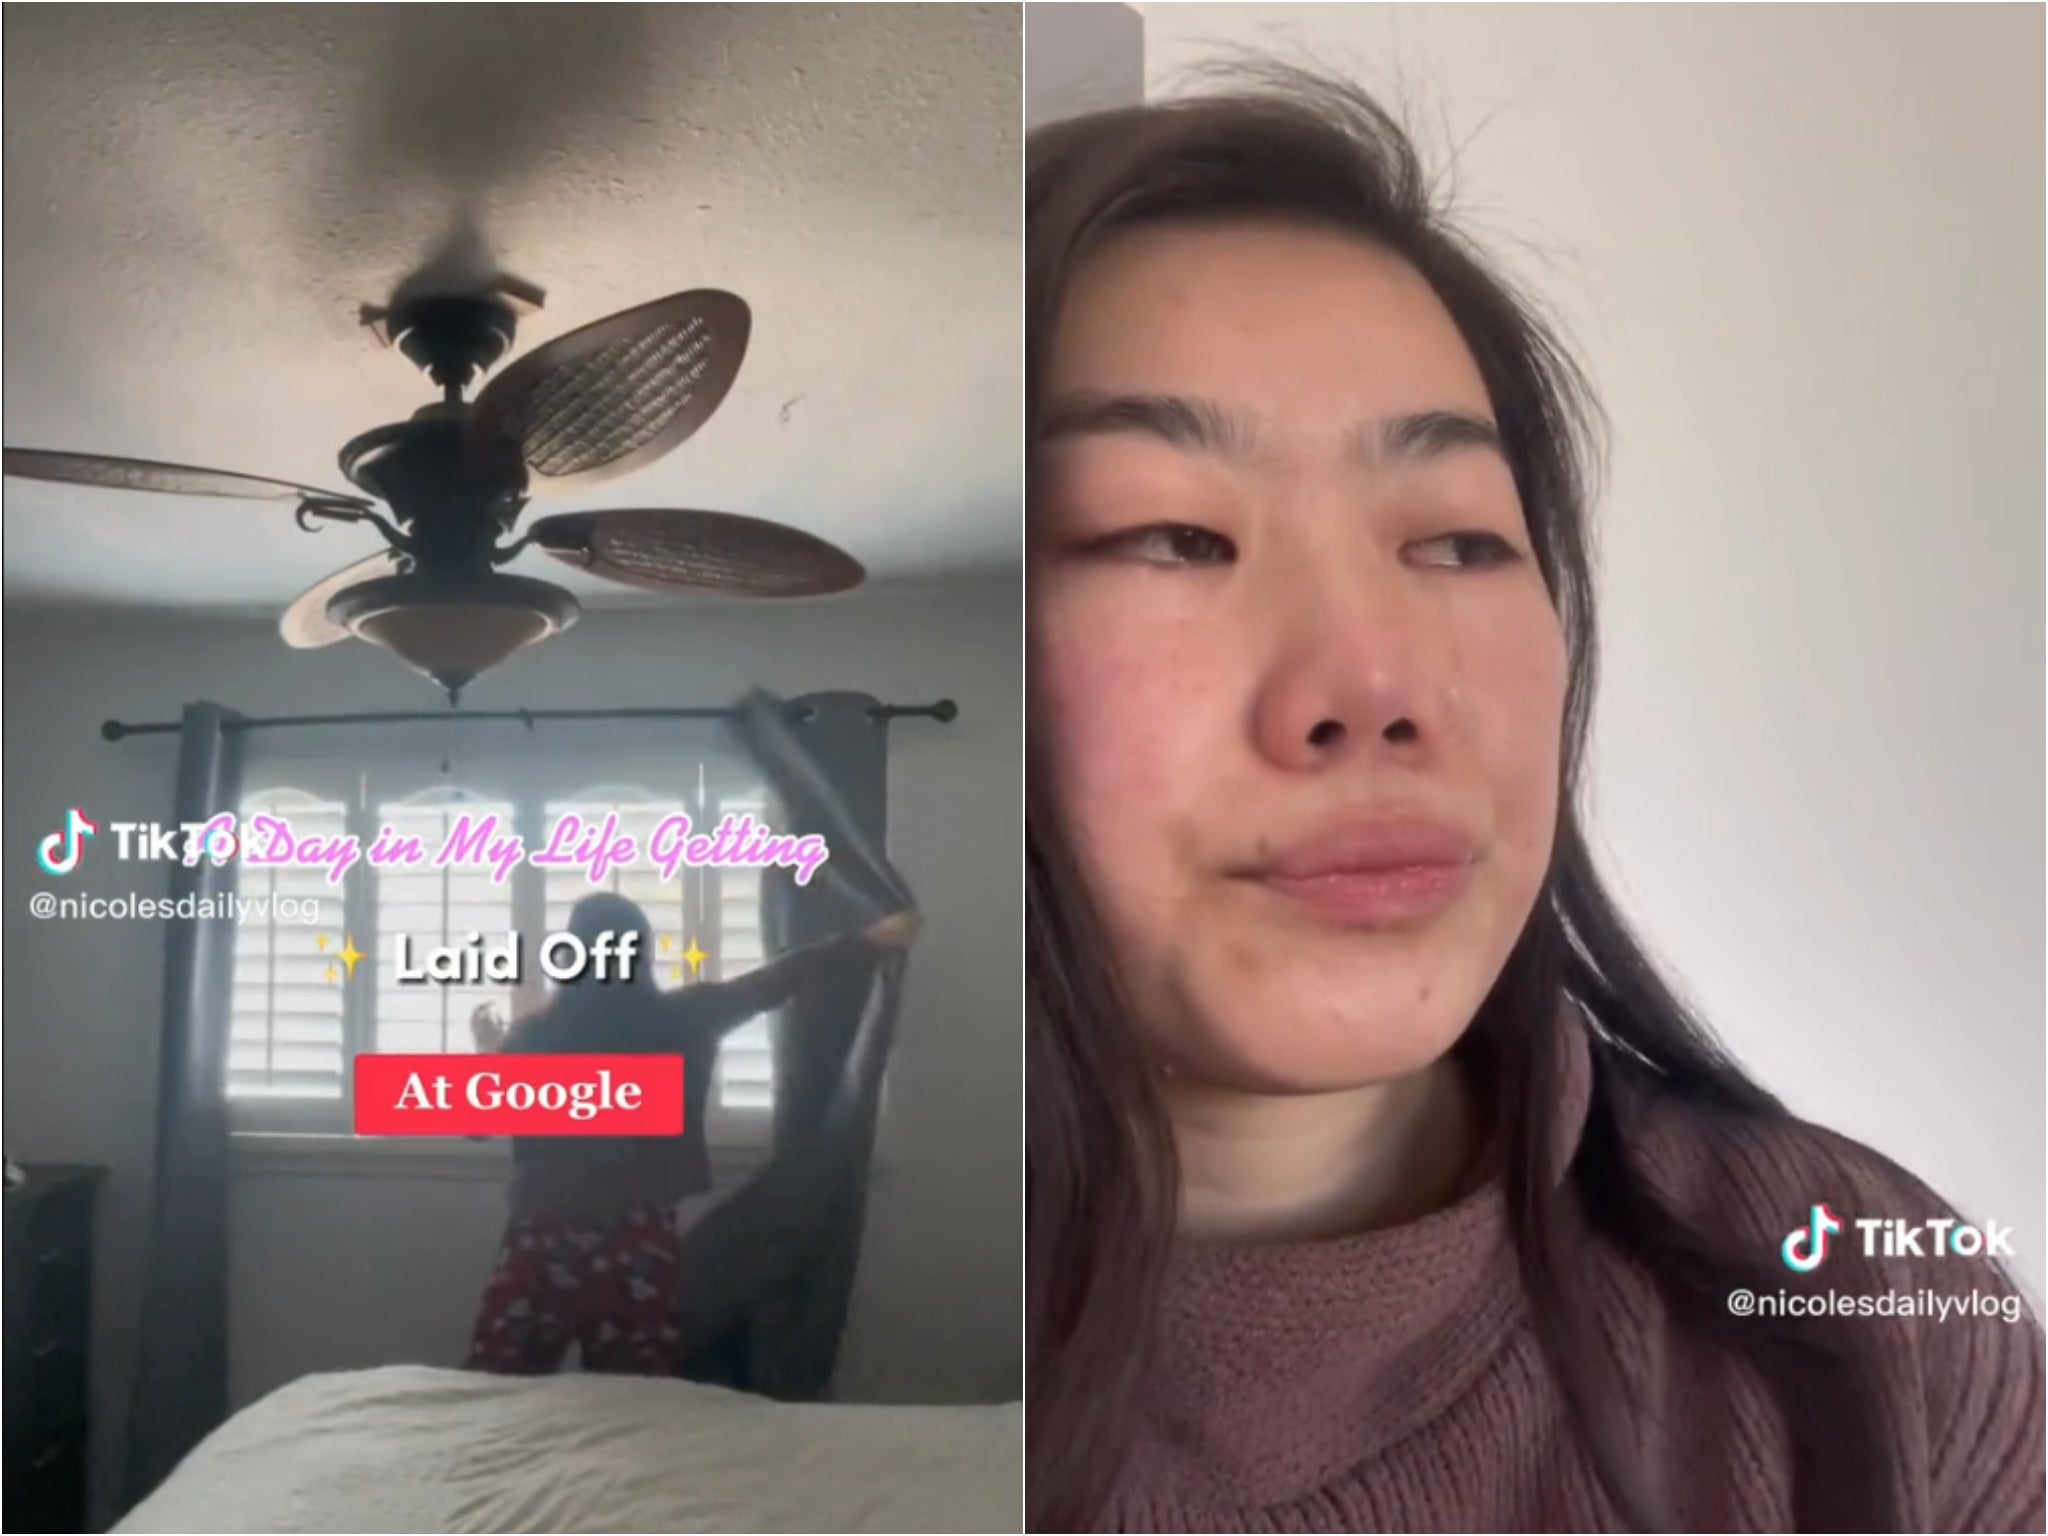 Nicole Tsai, a former Google employee, posted a video about “a day in my life getting laid off at Google”